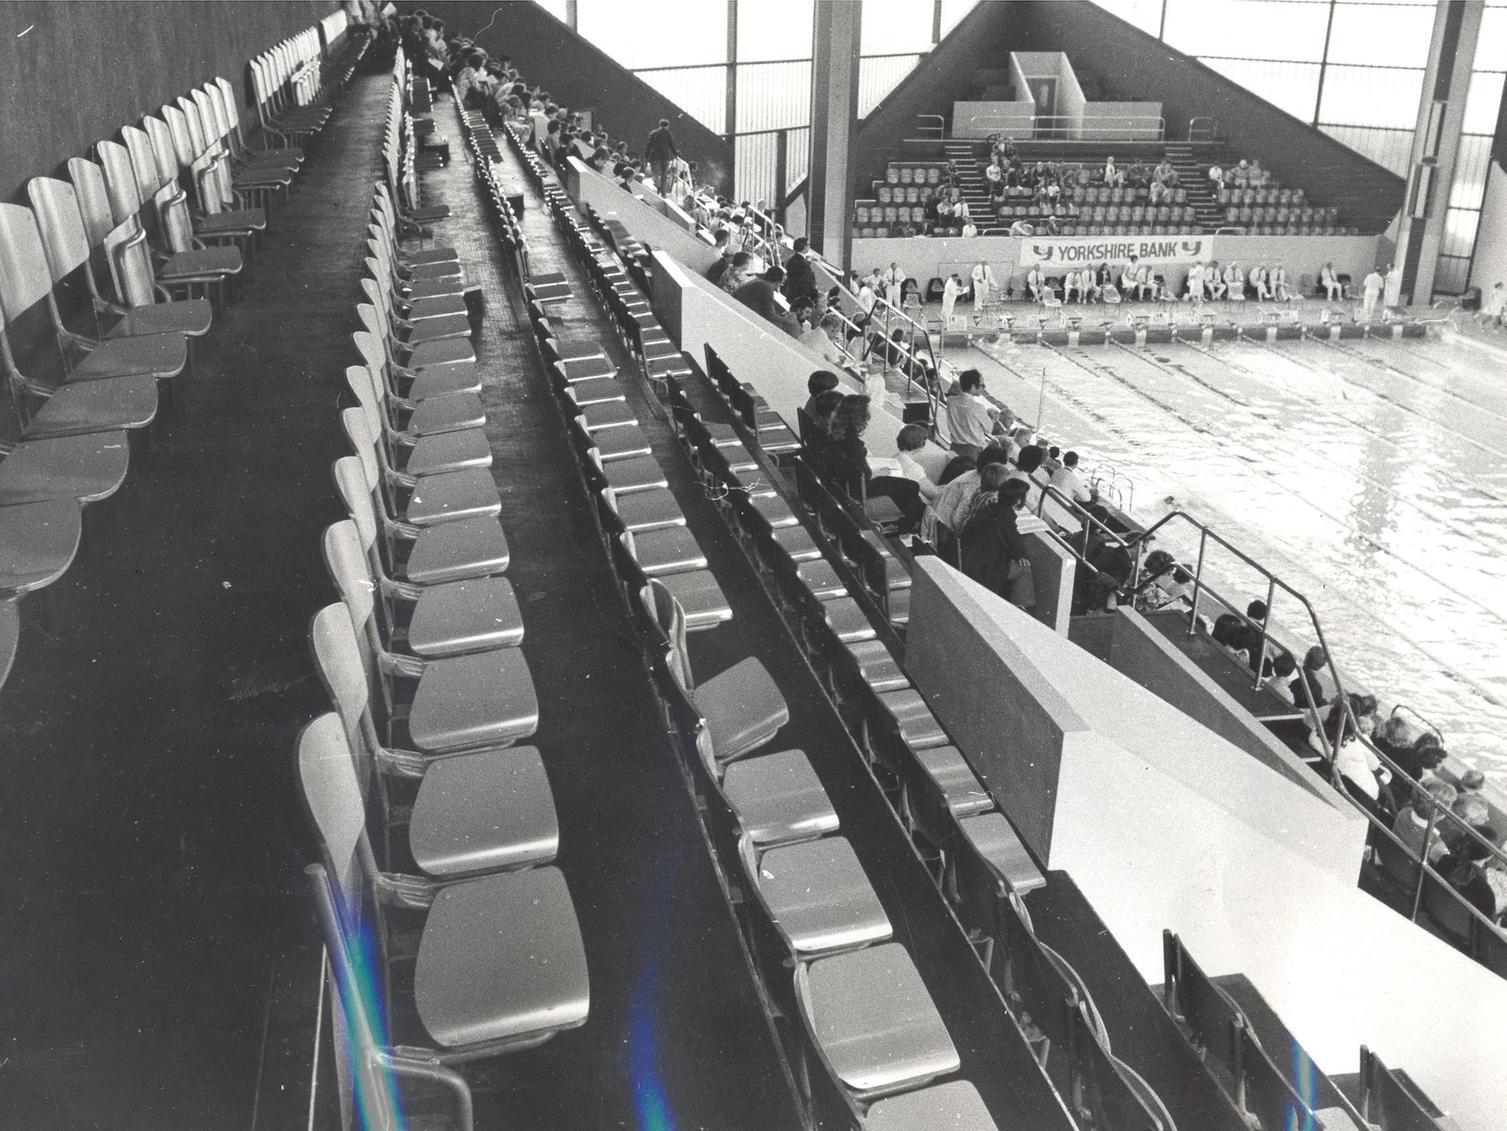 Rows of empty seats during the European Youth Swimming Championships.